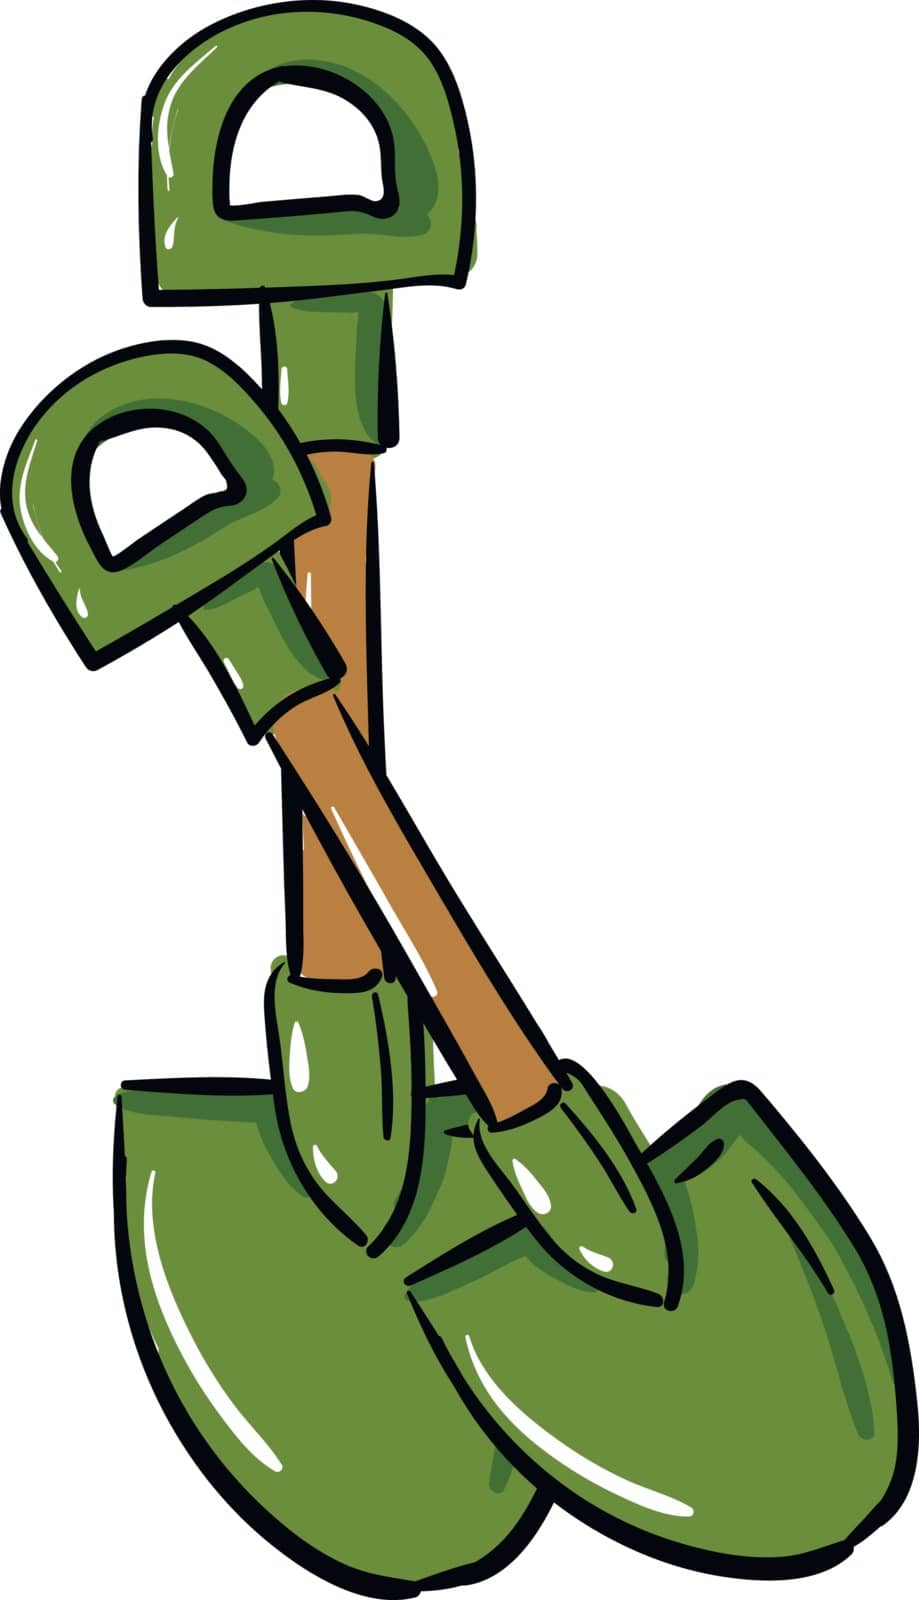 Green crossed shovels with handles illustration vector on white  by Morphart